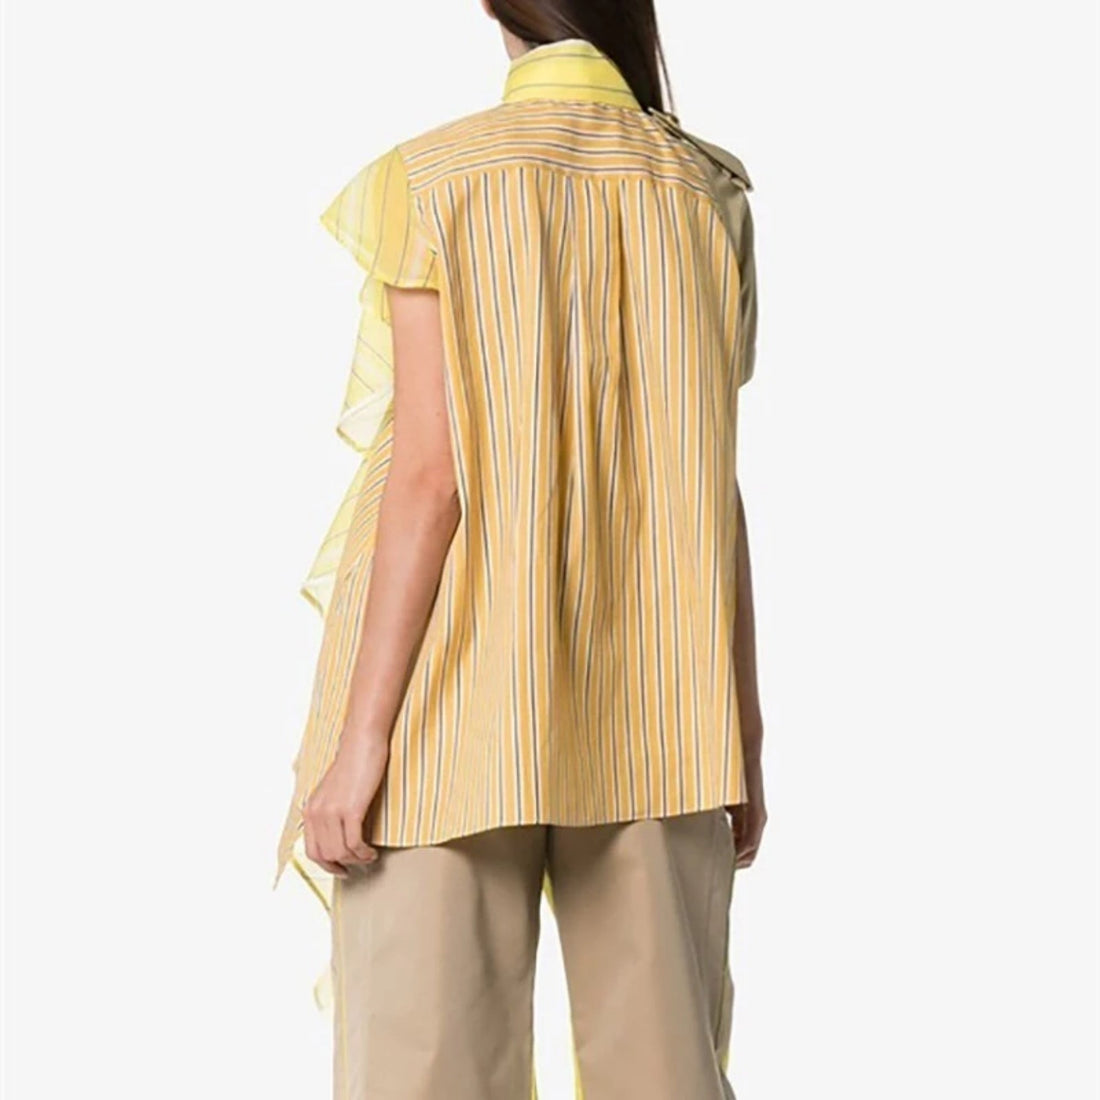 Women's Summer Casual Polyester Striped Blouse With Ruffles